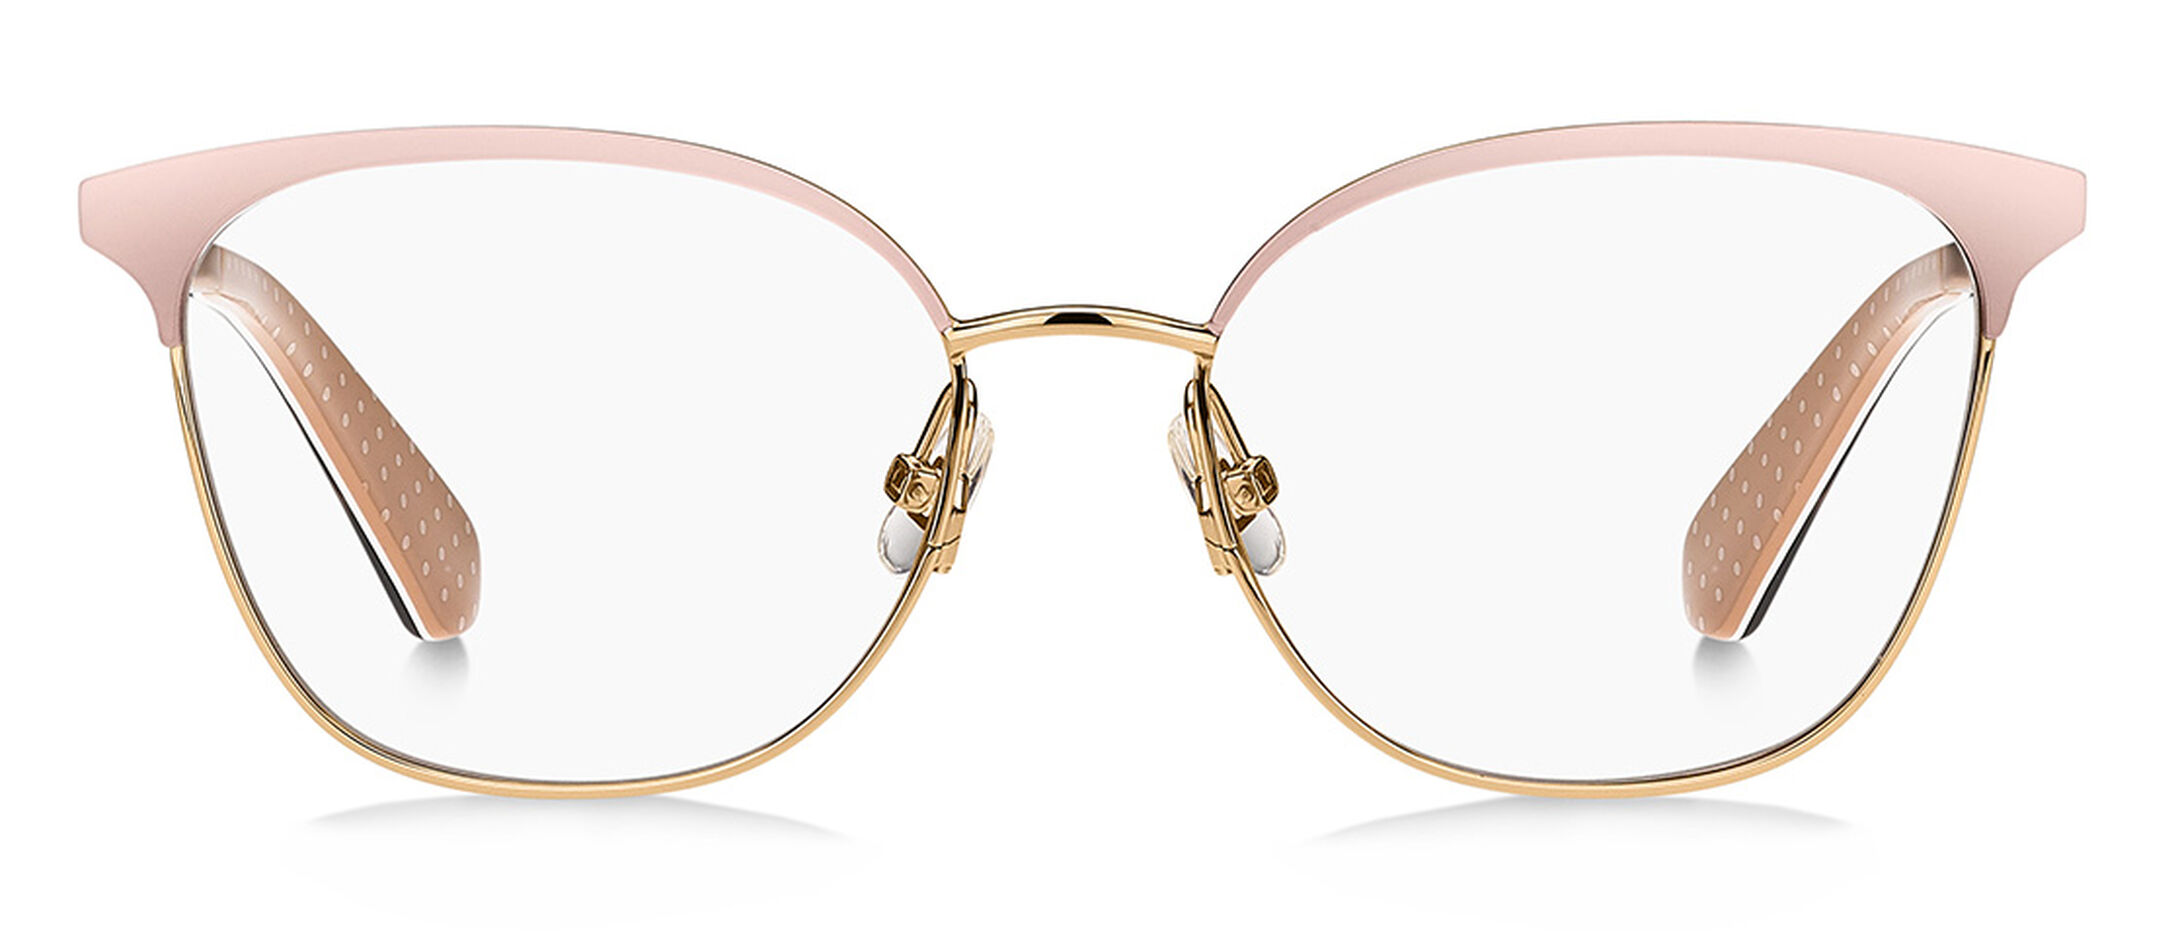 Kate Spade TANA/G Glasses | Free Shipping and Returns | Eyeconic